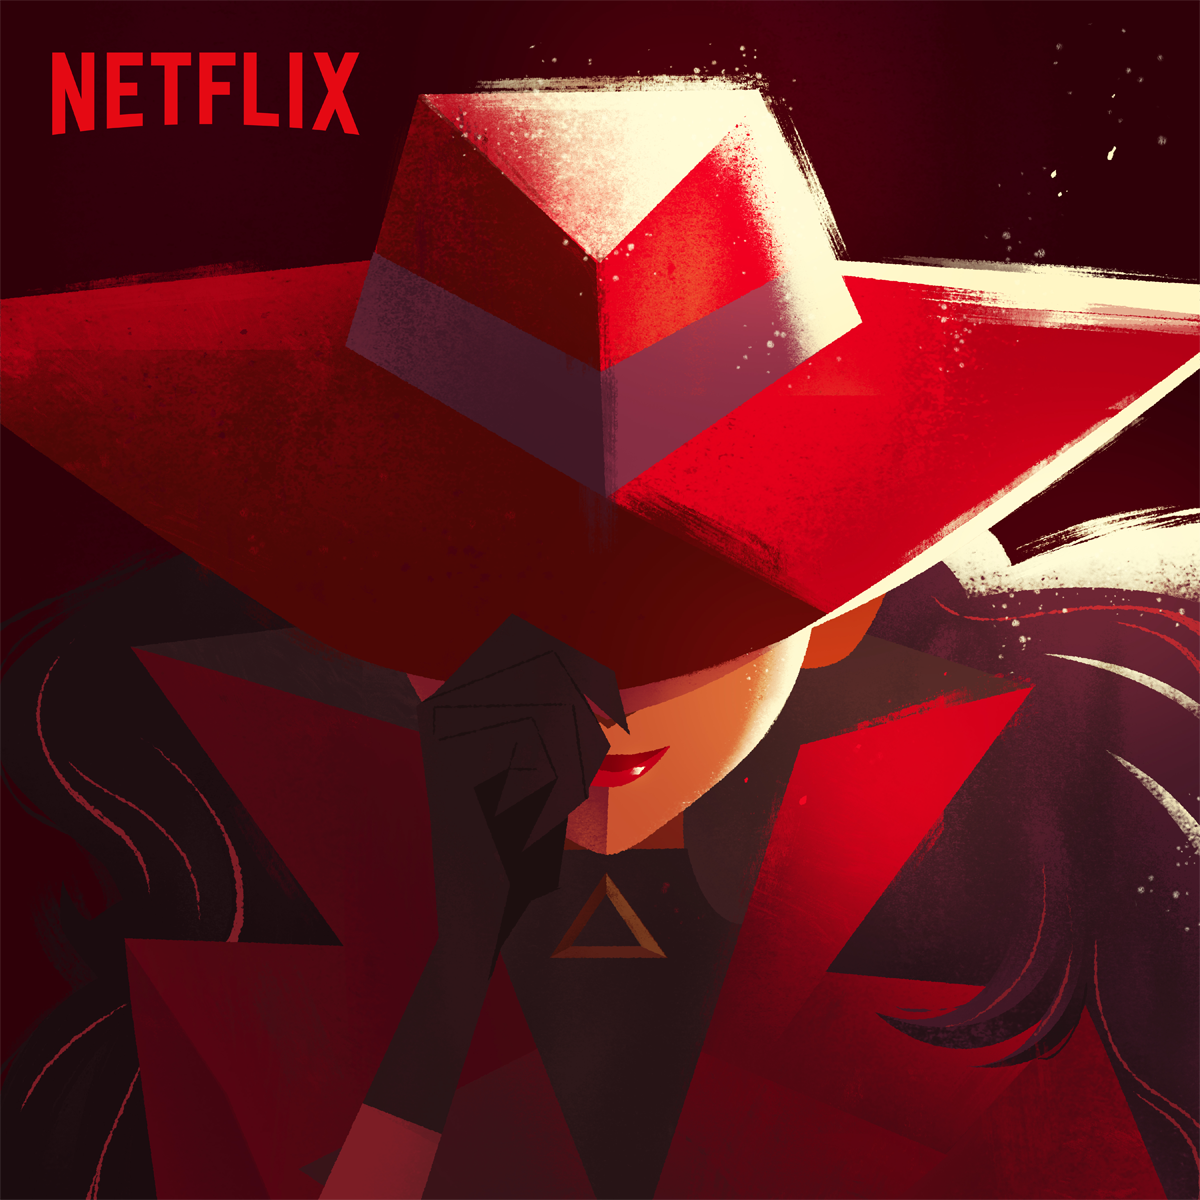 It’s Official: Carmen Sandiego Is Getting Her Own Animated Netflix Series